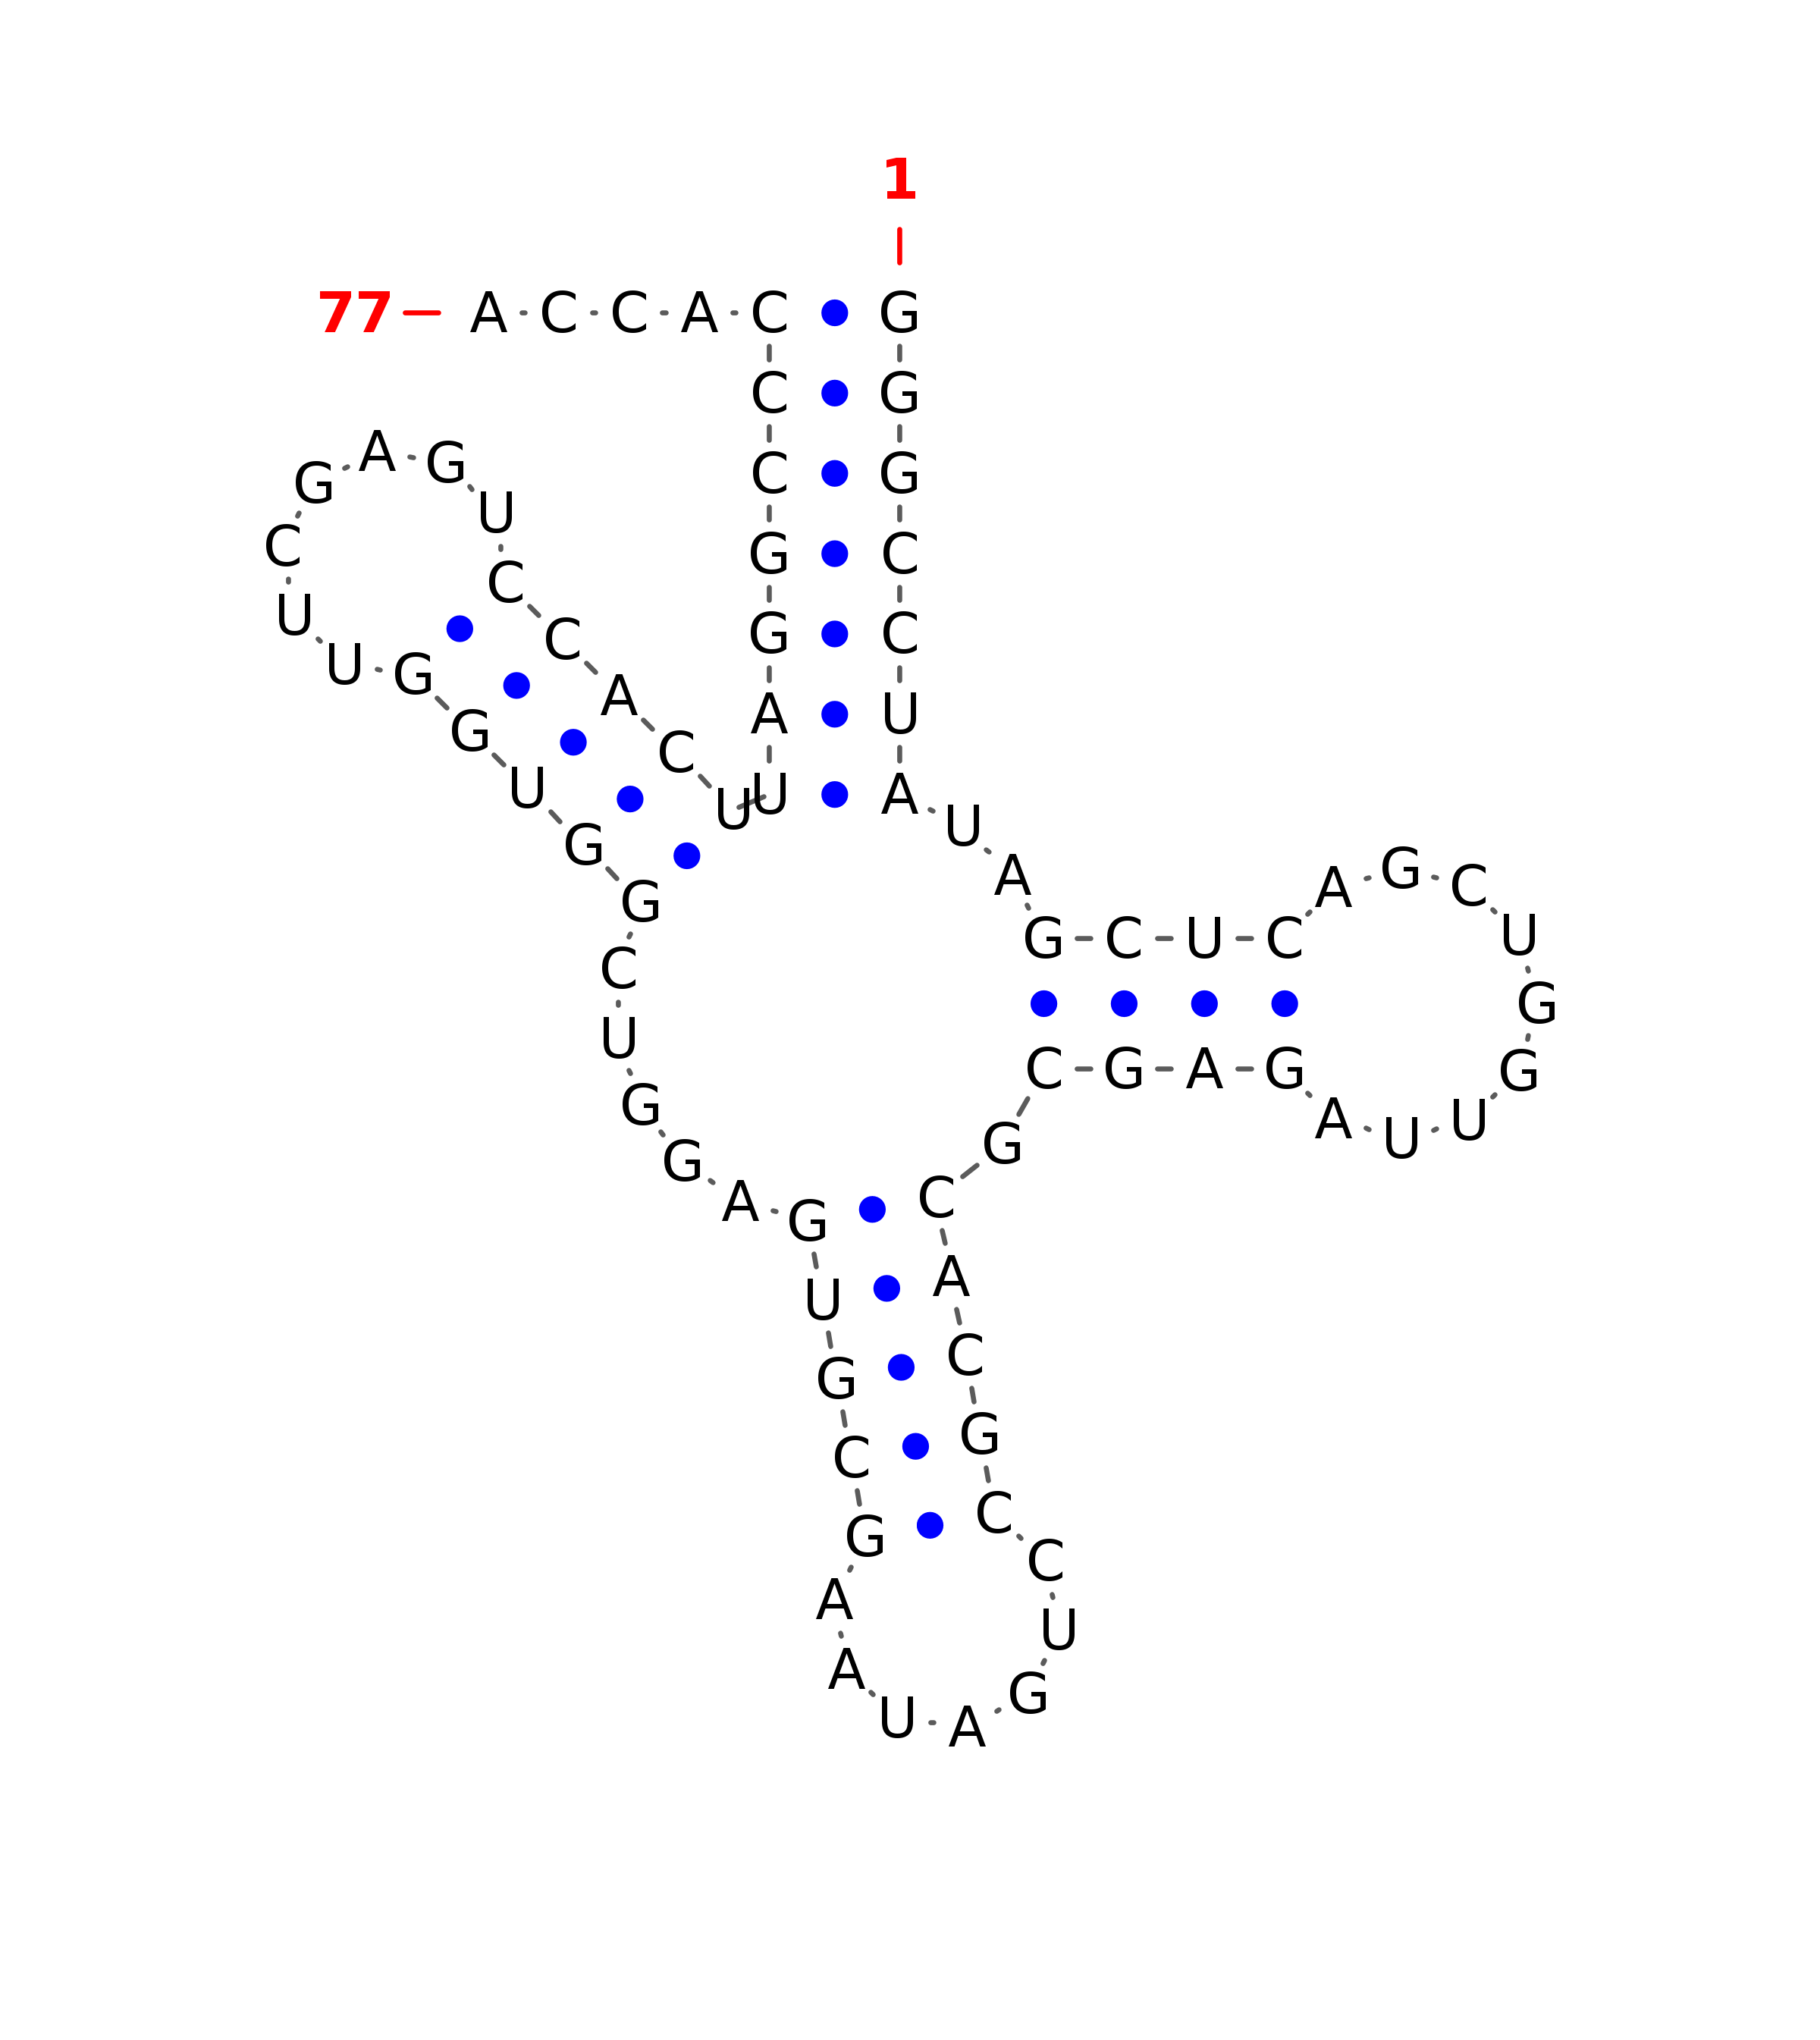 Top - tRNA secondary structure